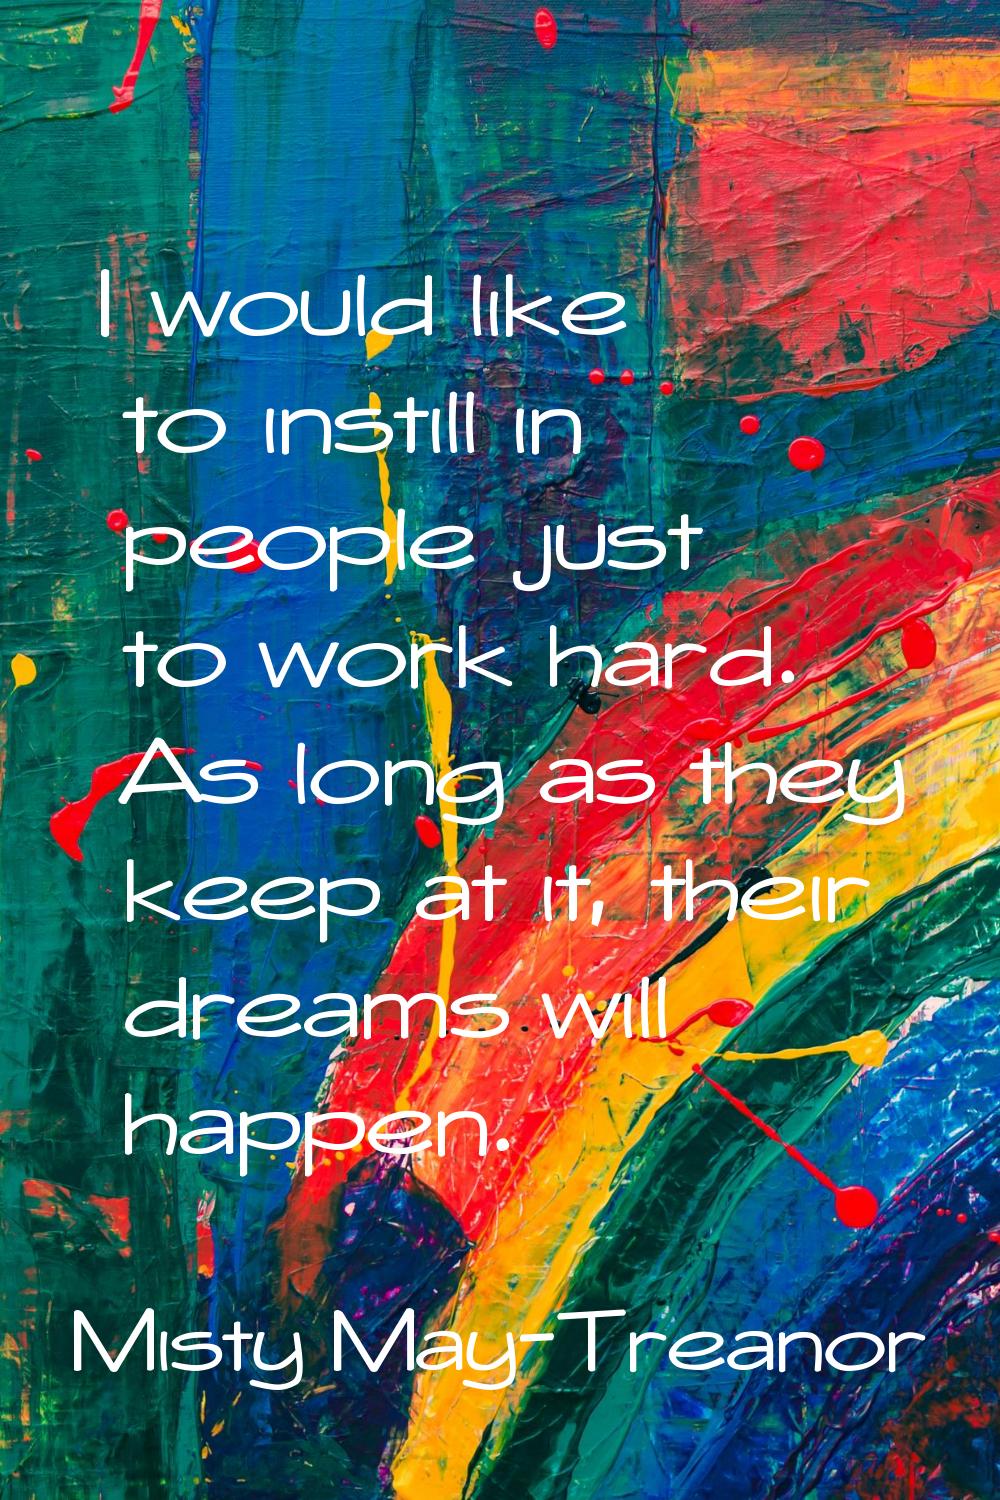 I would like to instill in people just to work hard. As long as they keep at it, their dreams will 